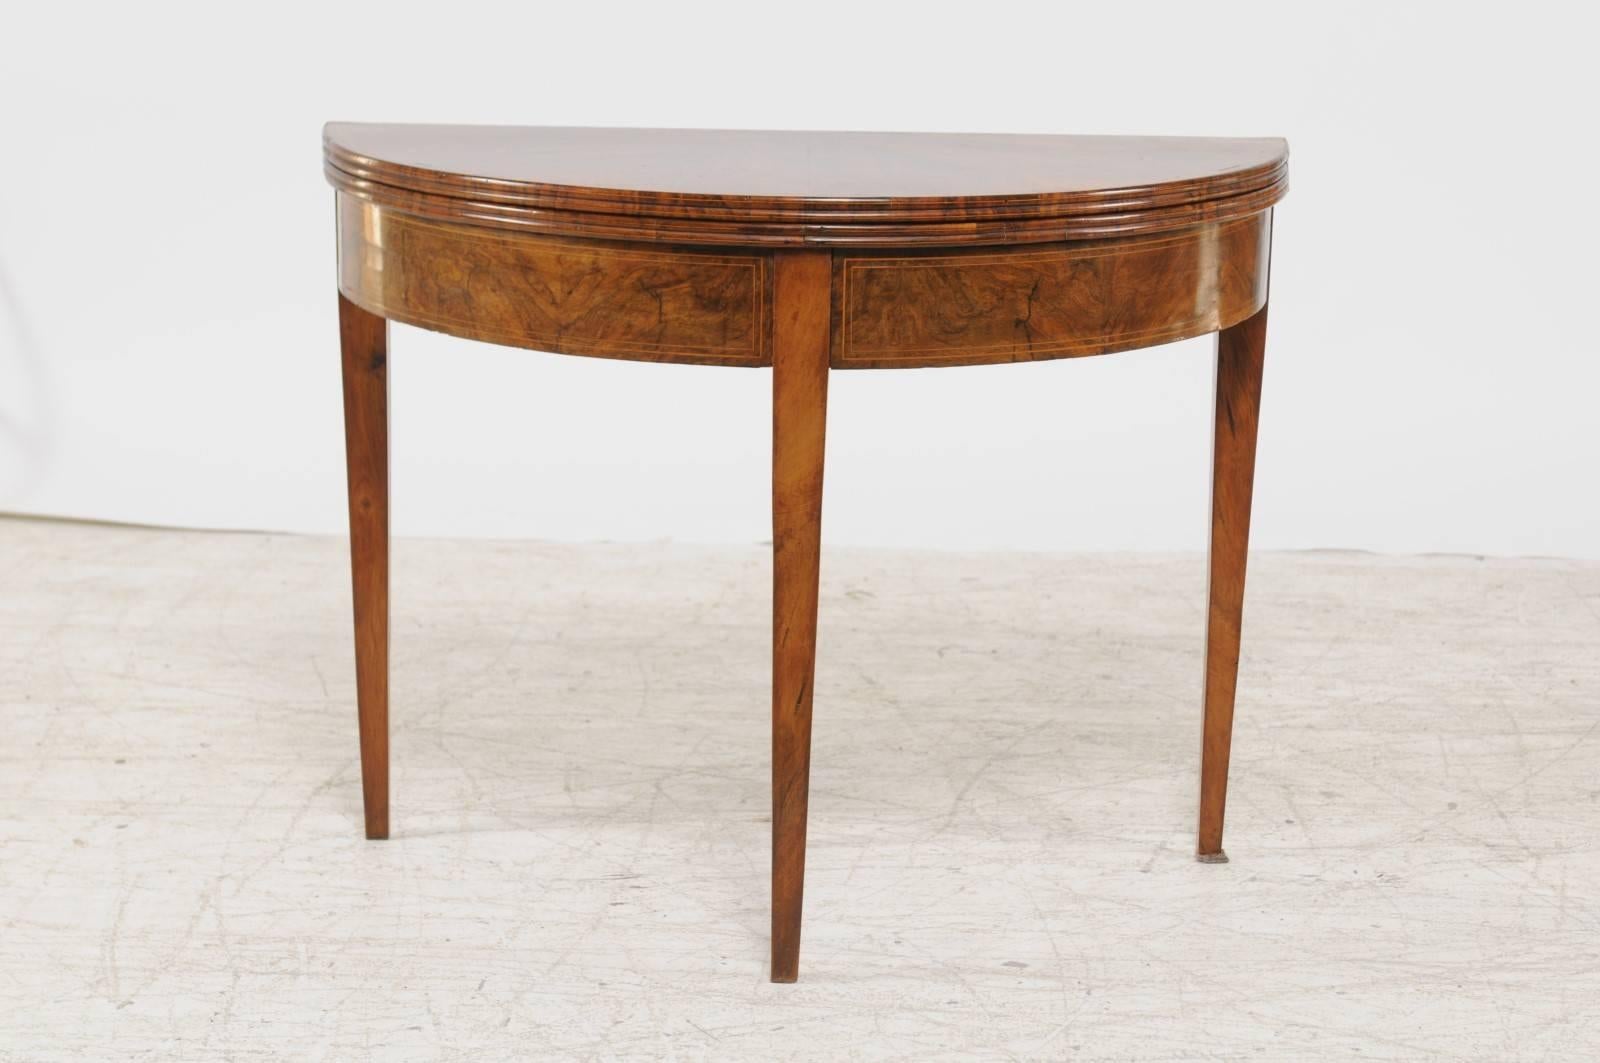 A French burled walnut demilune console table with quarter-veneered fold-over top, banded inlay and tapered legs from the late 19th century. This French demilune table features a semi-circular top, adorned with an exquisite quarter veneer,